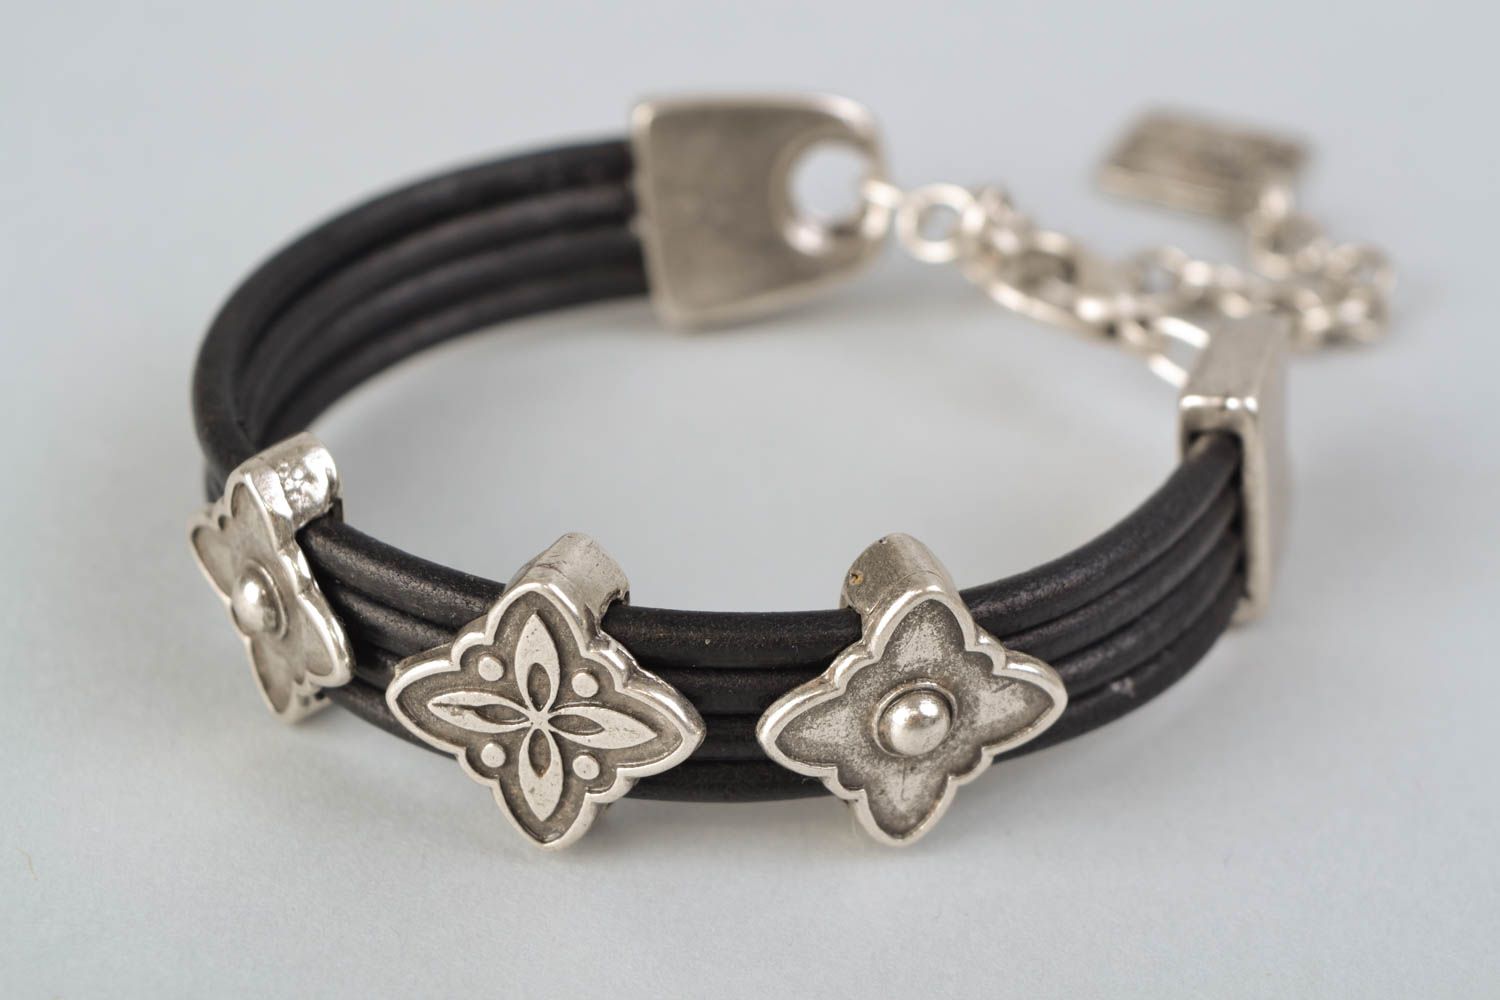 Metal bracelet with leather cord photo 4